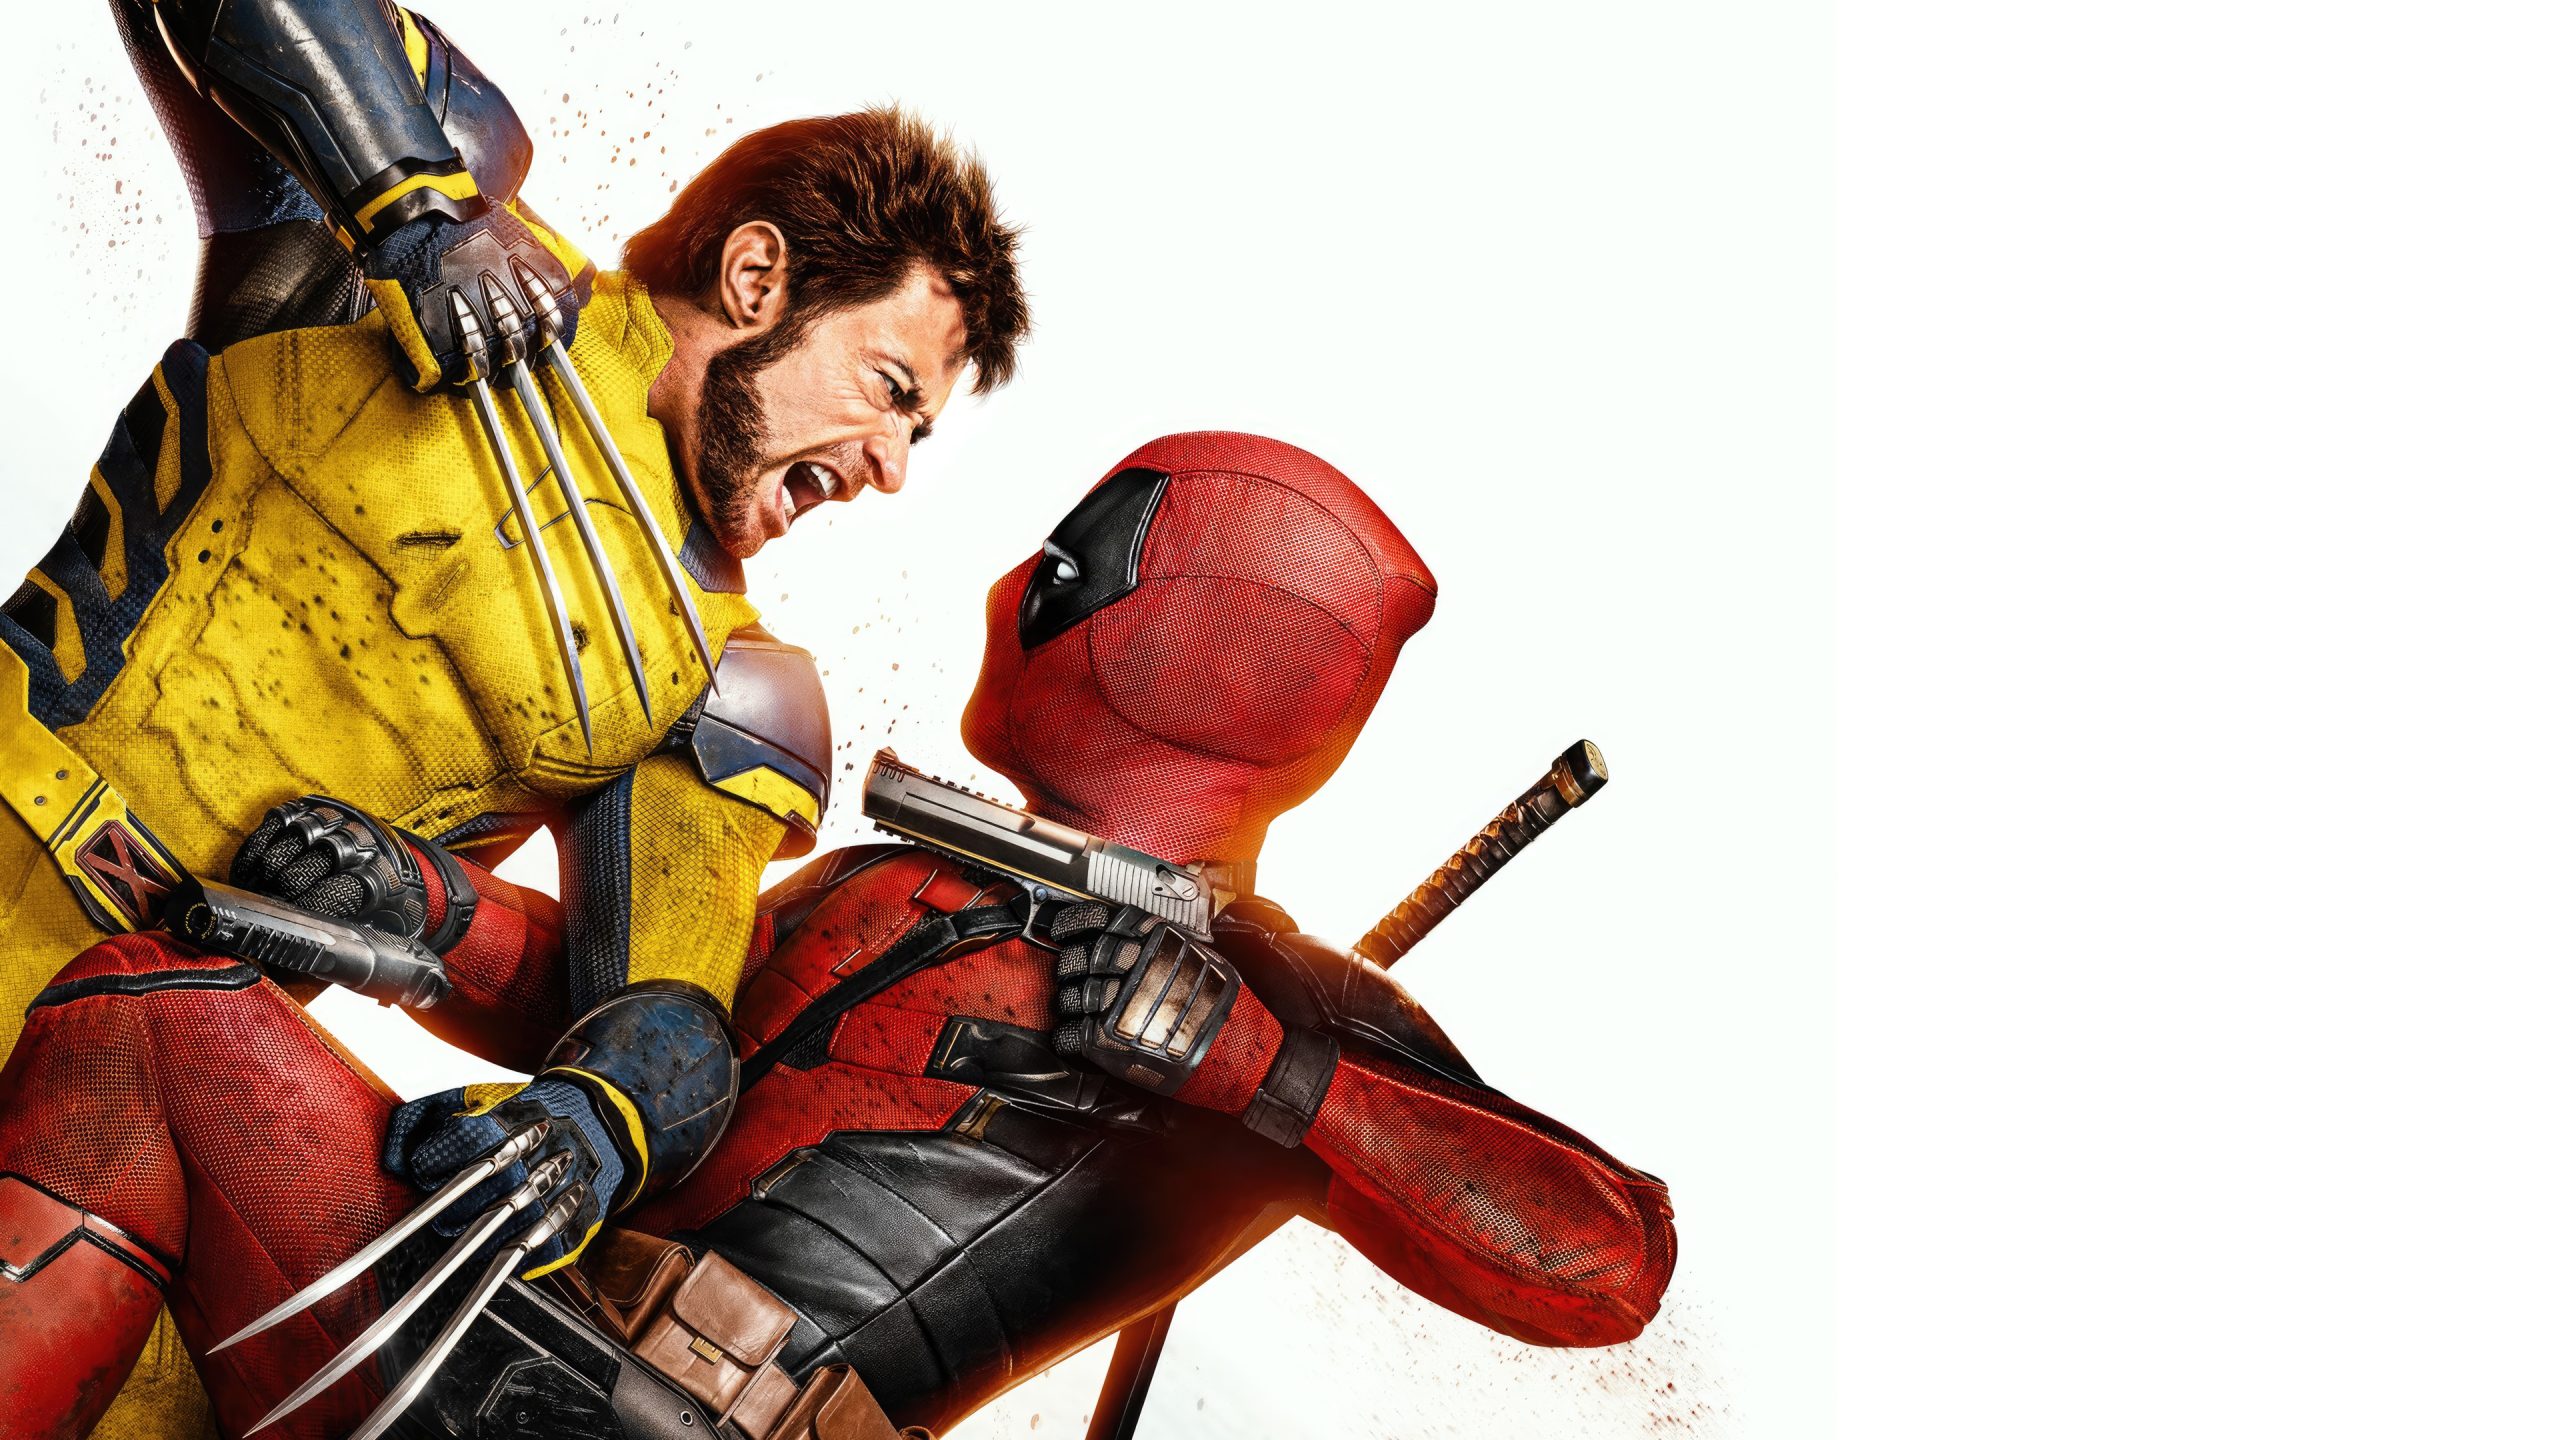 Deadpool and Wolverine soundtrack